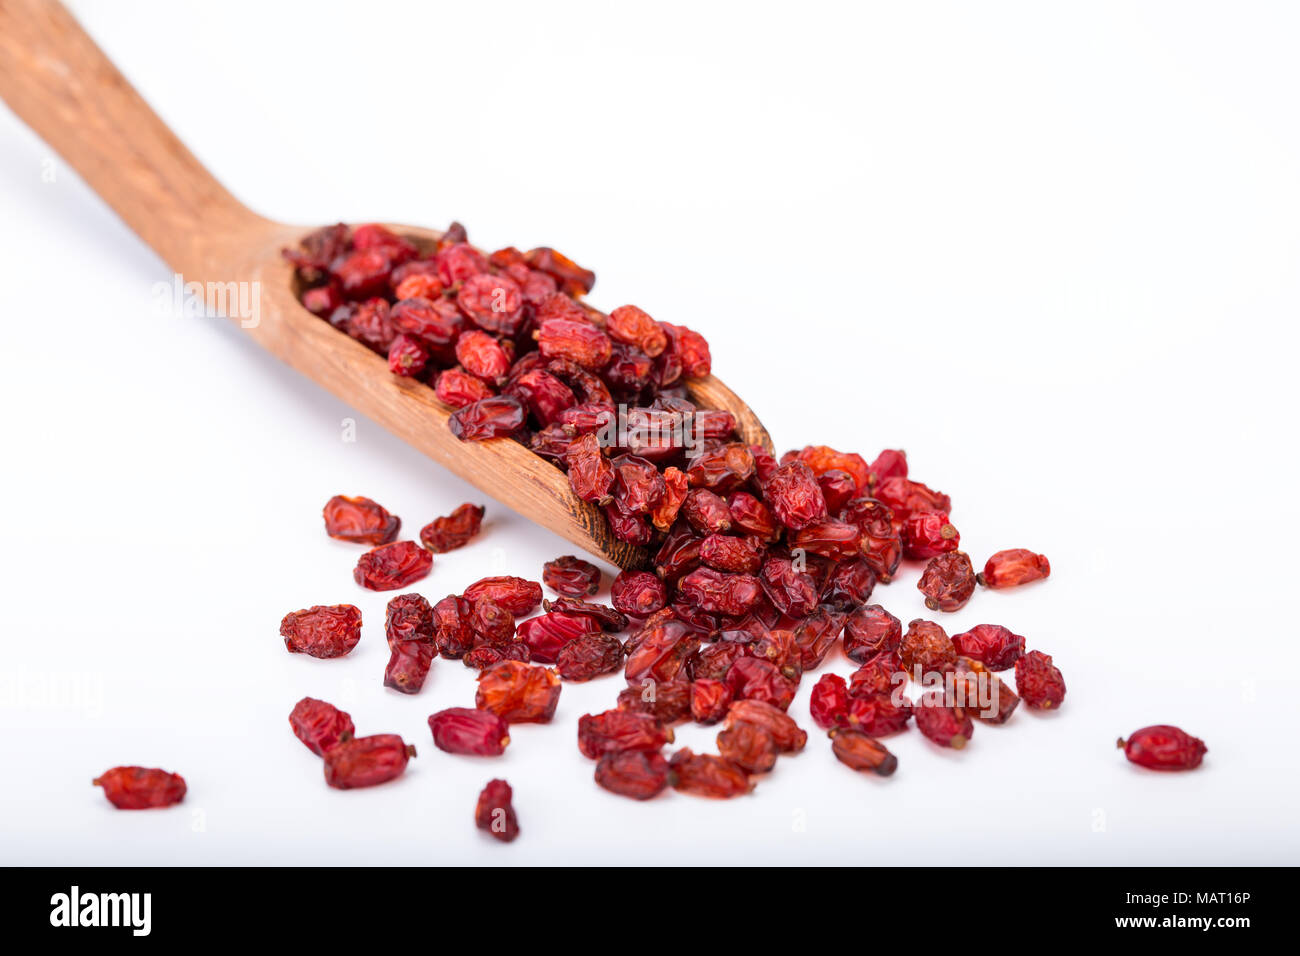 Close Up And Selective Focus Of Barberries Dry Fruits In A Wooden Spoon Isolated On White Background Also Called Zereshk And Used For Garnishing Rice  Stock Photo